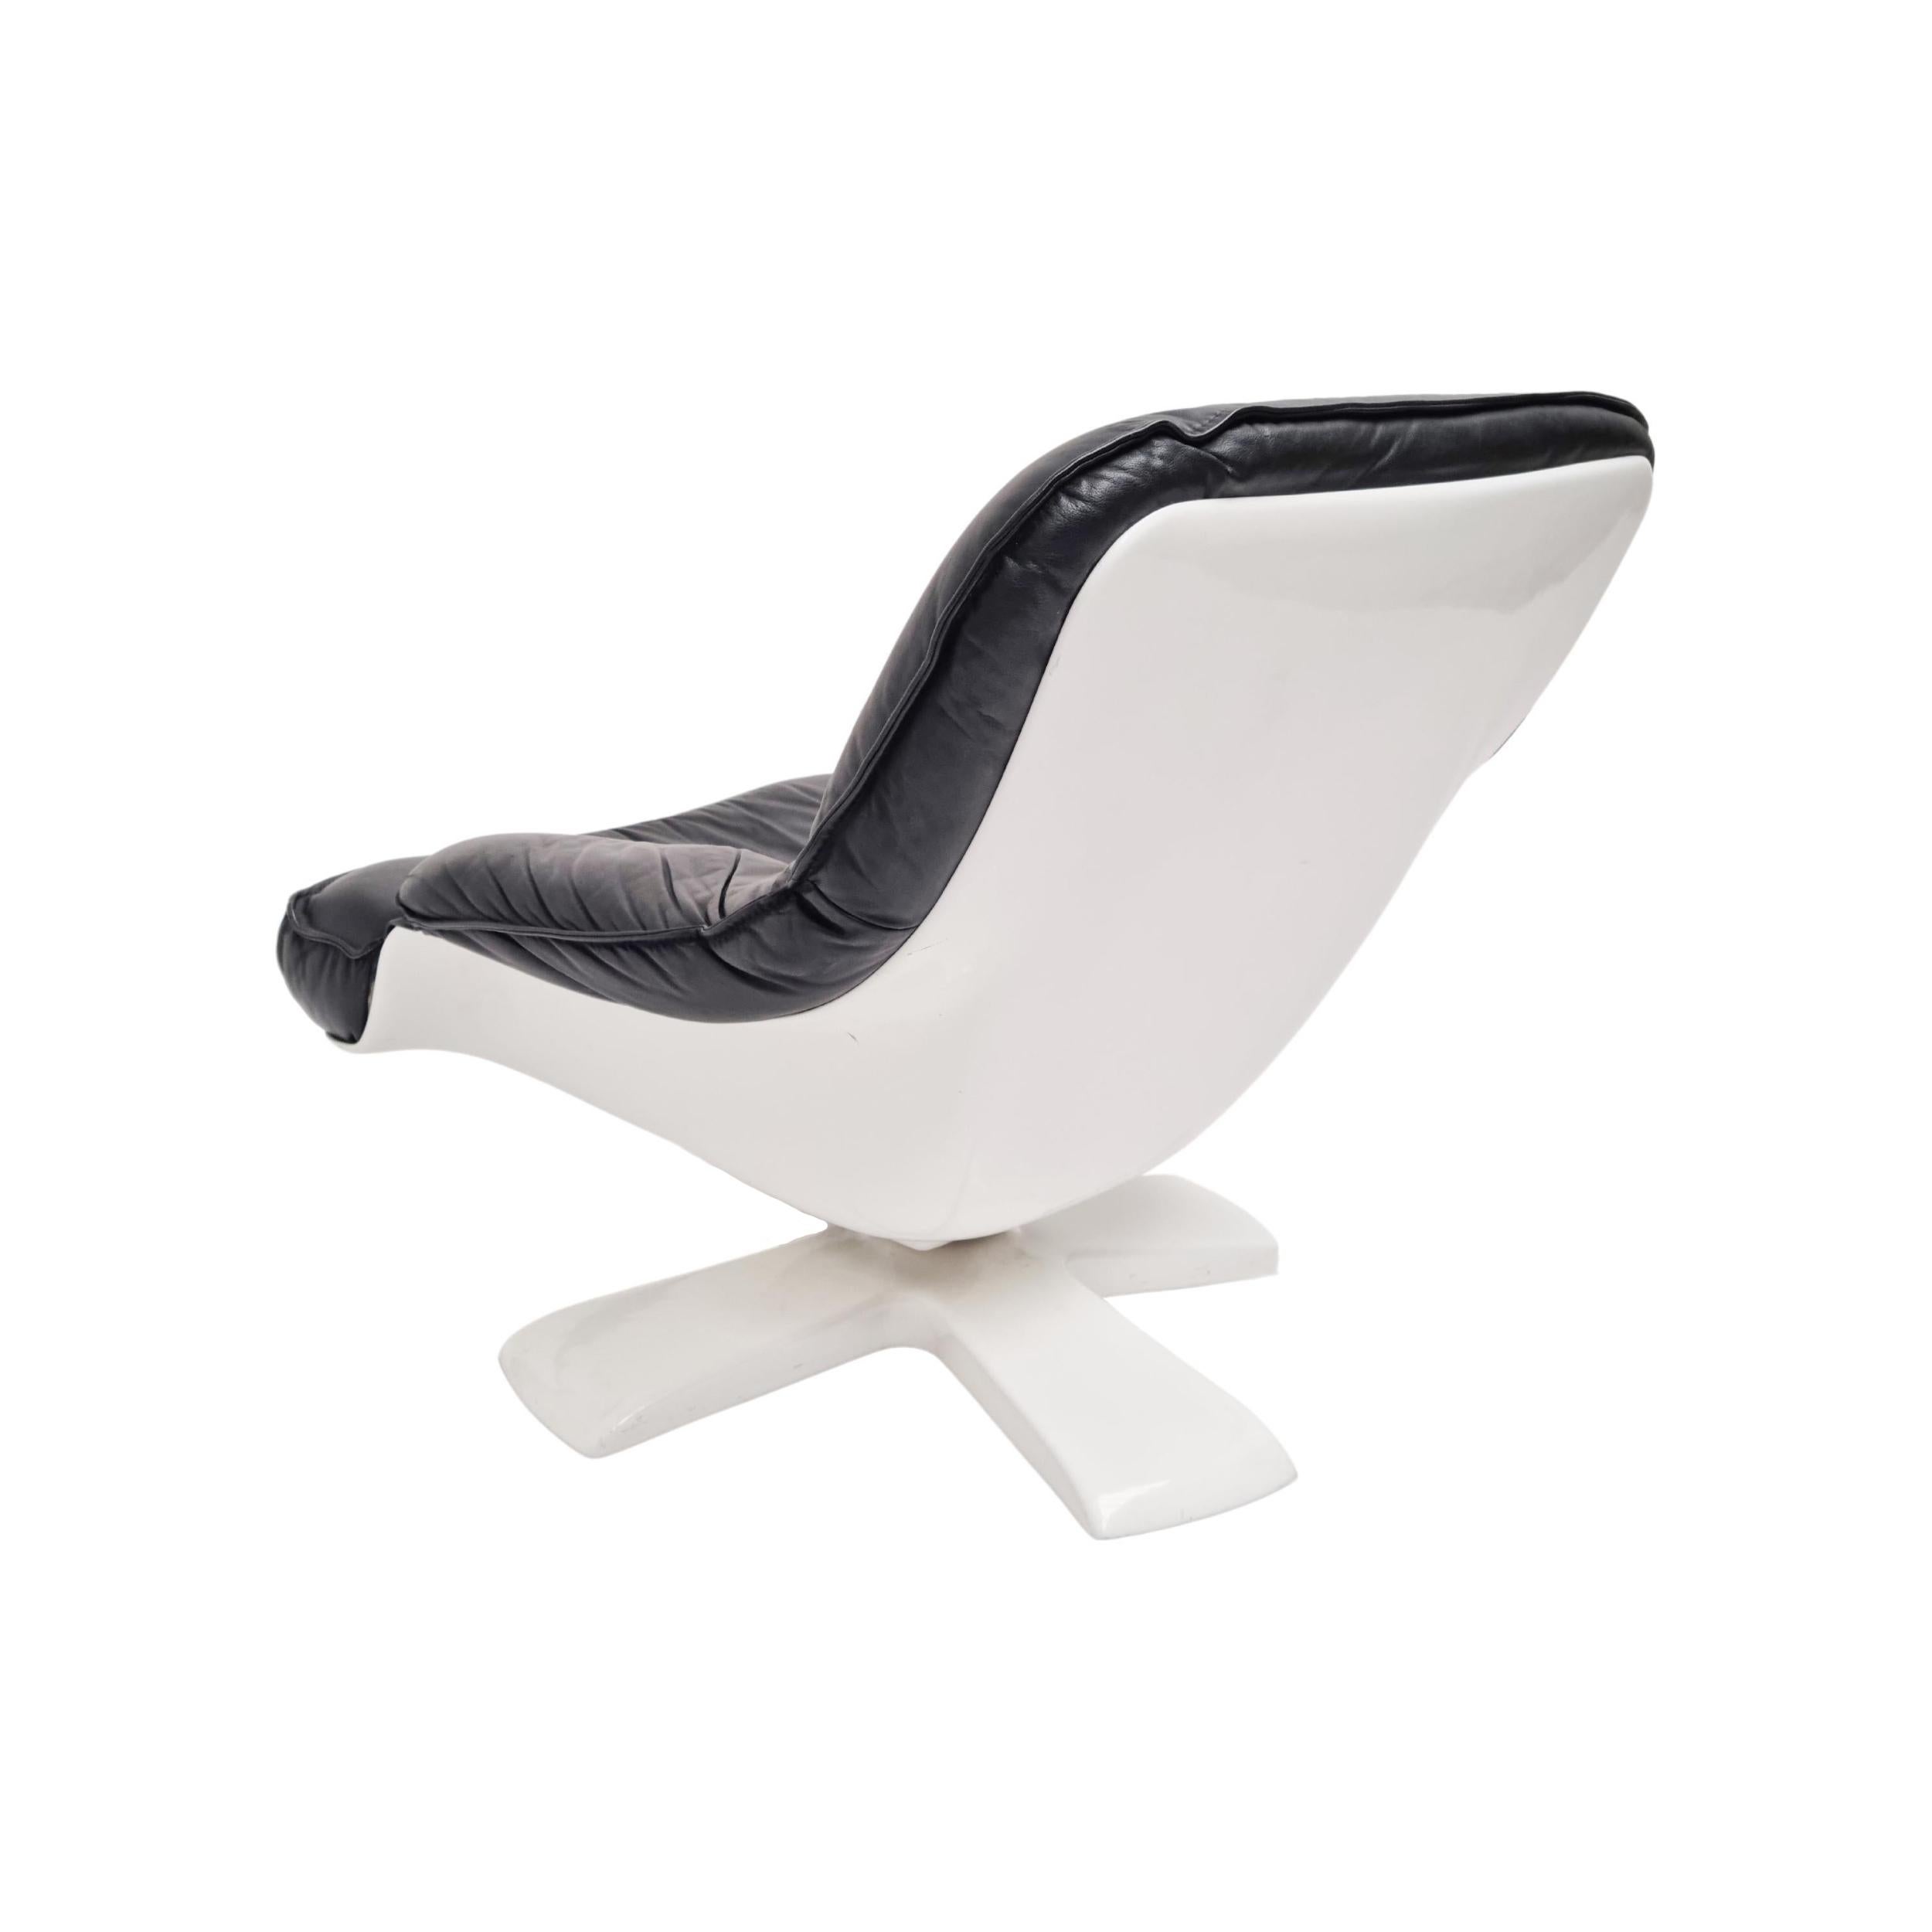 Organic shaped lounge chair.  This chair consists of a molded fiberglass shell that is comfortably upholstered in black leather. The thick star-like base provides stability and features a tilt as well as a swivel function to maximize comfort. The